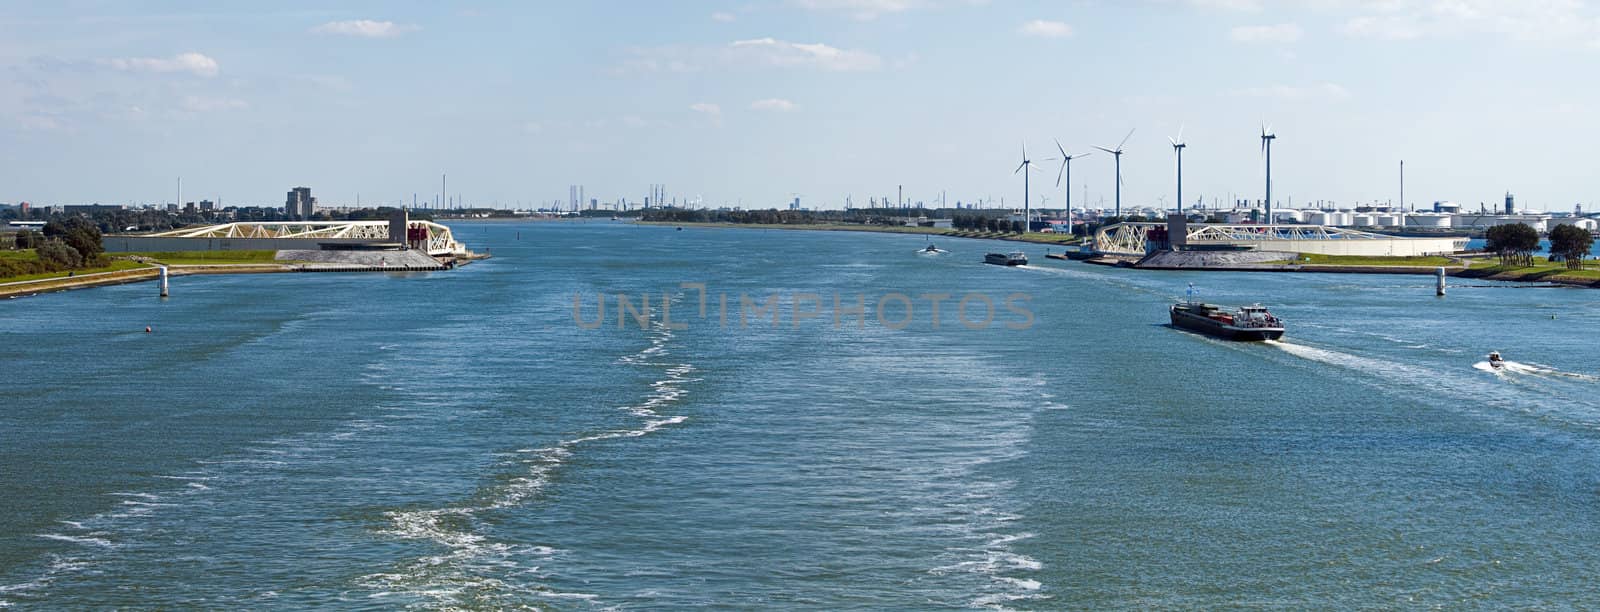 Panorama of the famous storm surge barrier "Maaslantkering" in the river Maas near Rotterdam, the Netherlands